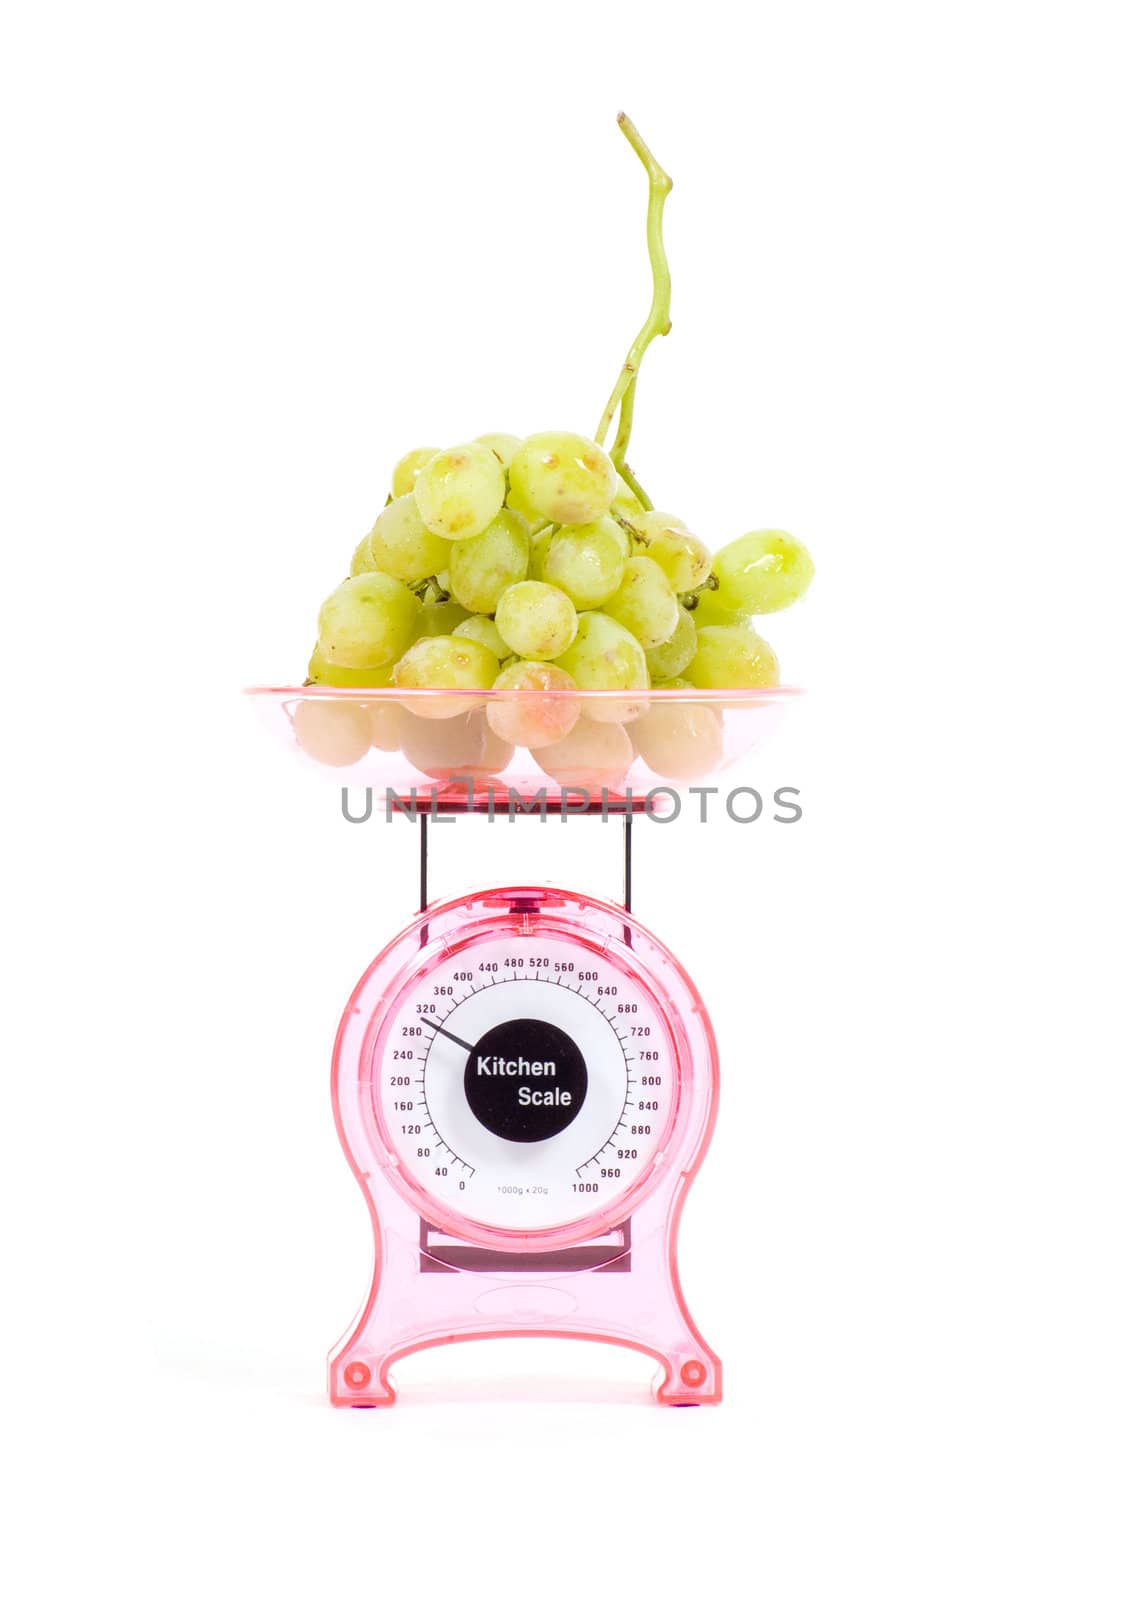 Kitchen Scales filled with green grapes by ladyminnie